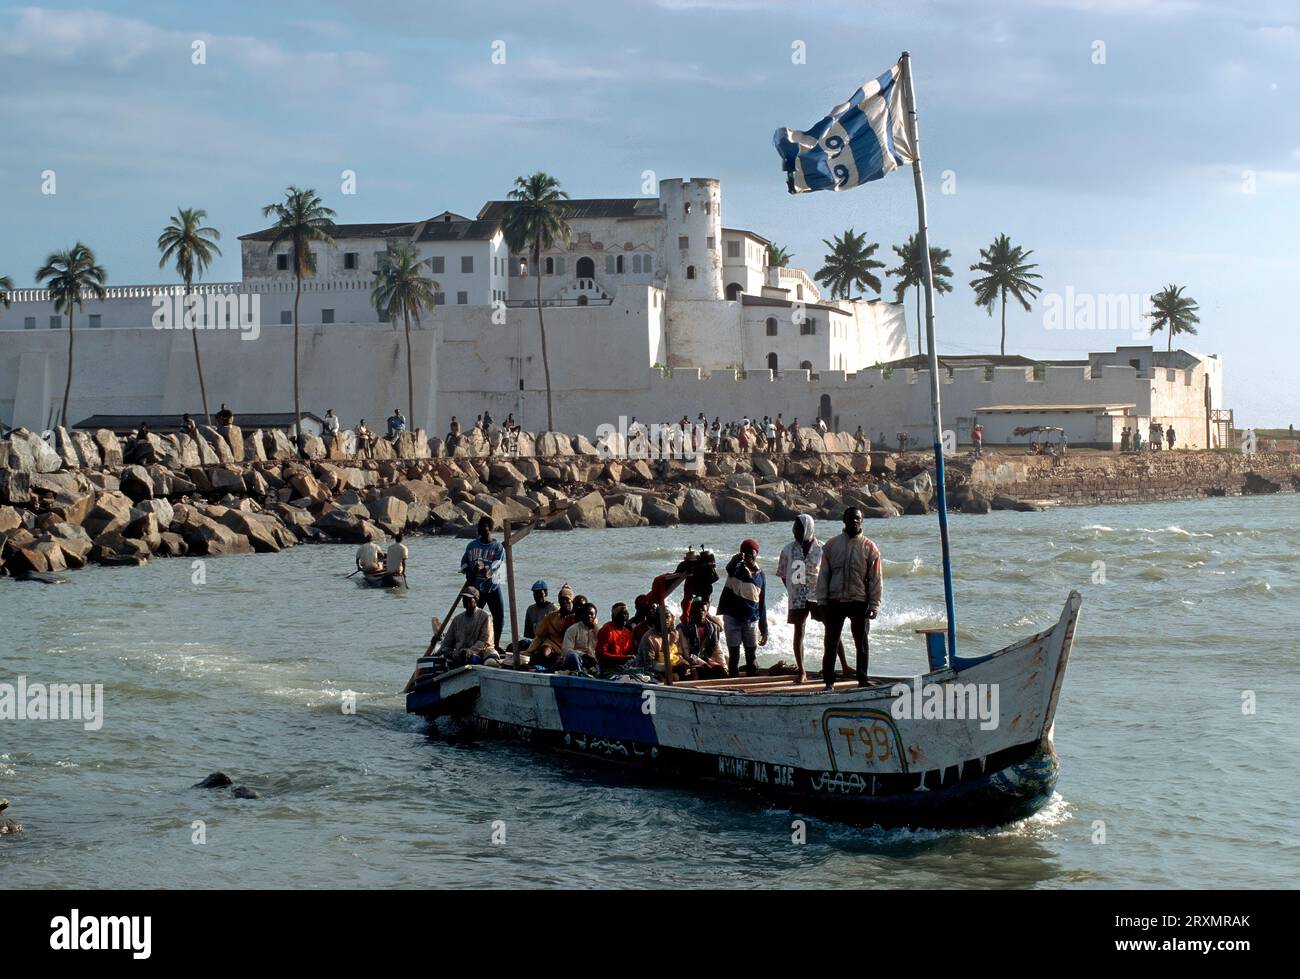 GHA, Ghana: Boat in front of Fort Elmina. Built by the Portuguese in the fifteenth century and later owned by the Dutch and the English, Fort Elmina held Africans before shipment to the slave markets of the Americas Stock Photo